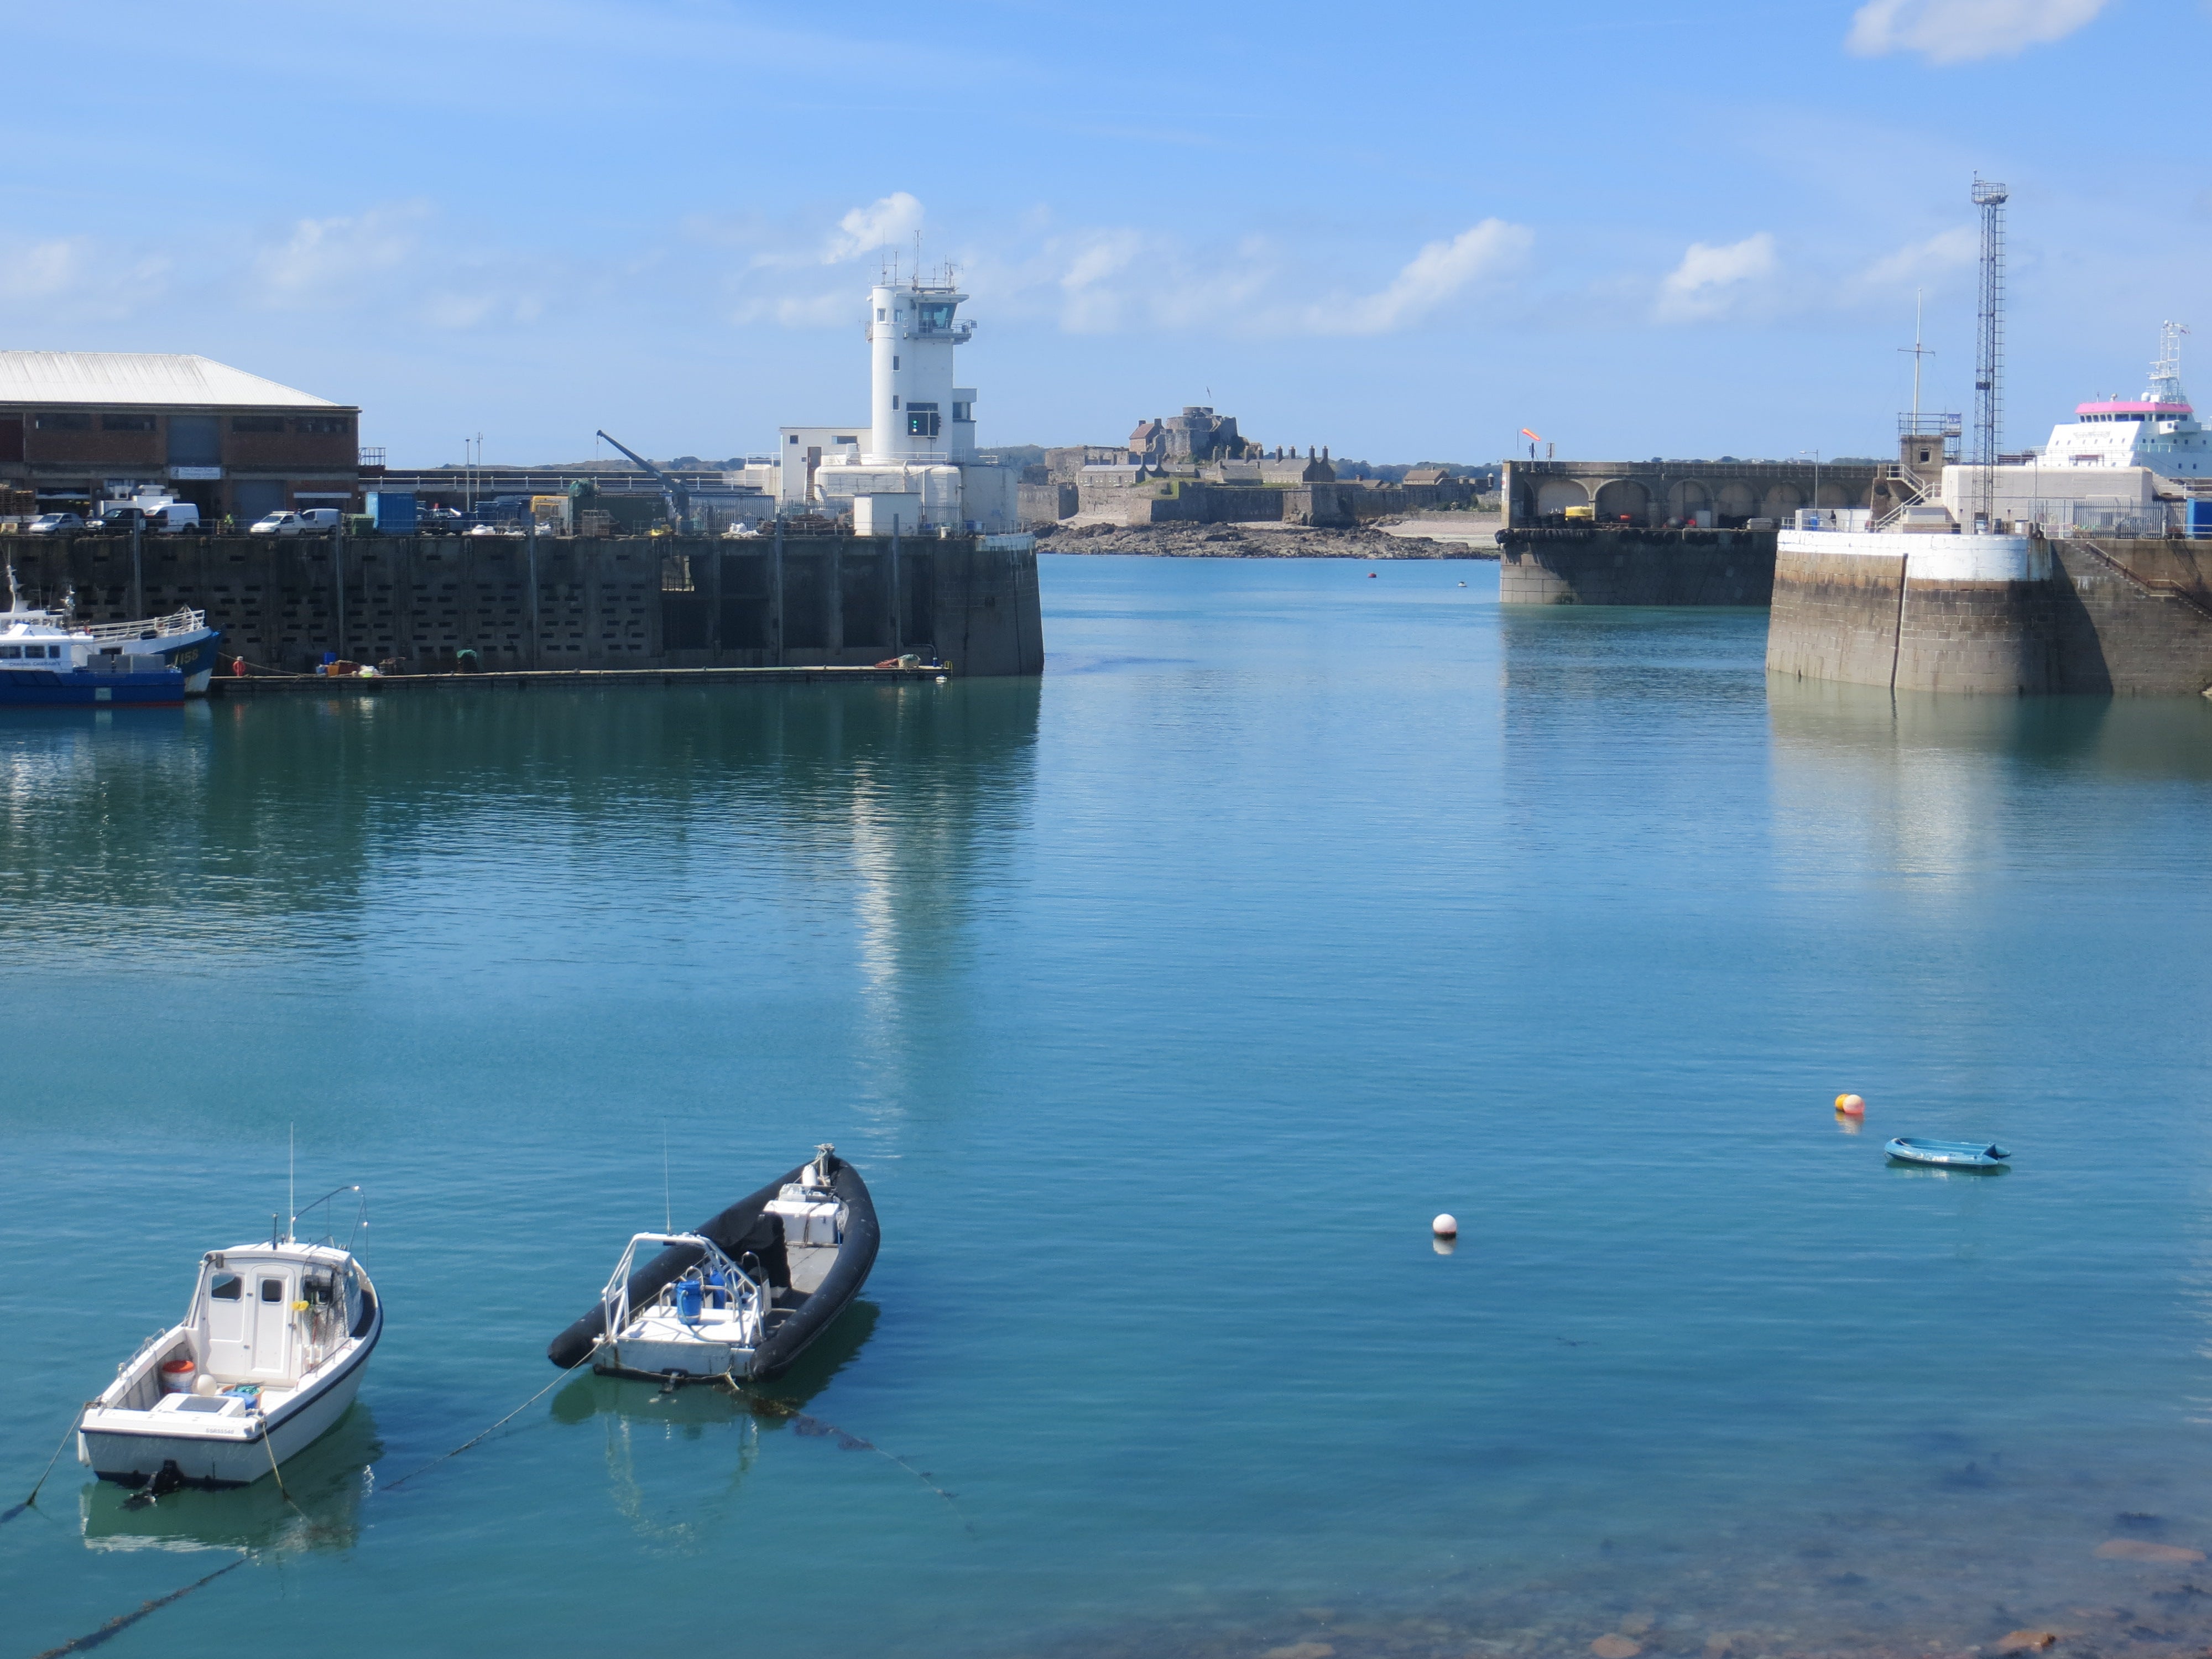 The harbour in St Helier, Jersey, is shown on 7 May, 2021, the day after a French flotilla gathered there amid a row on fishing rights.